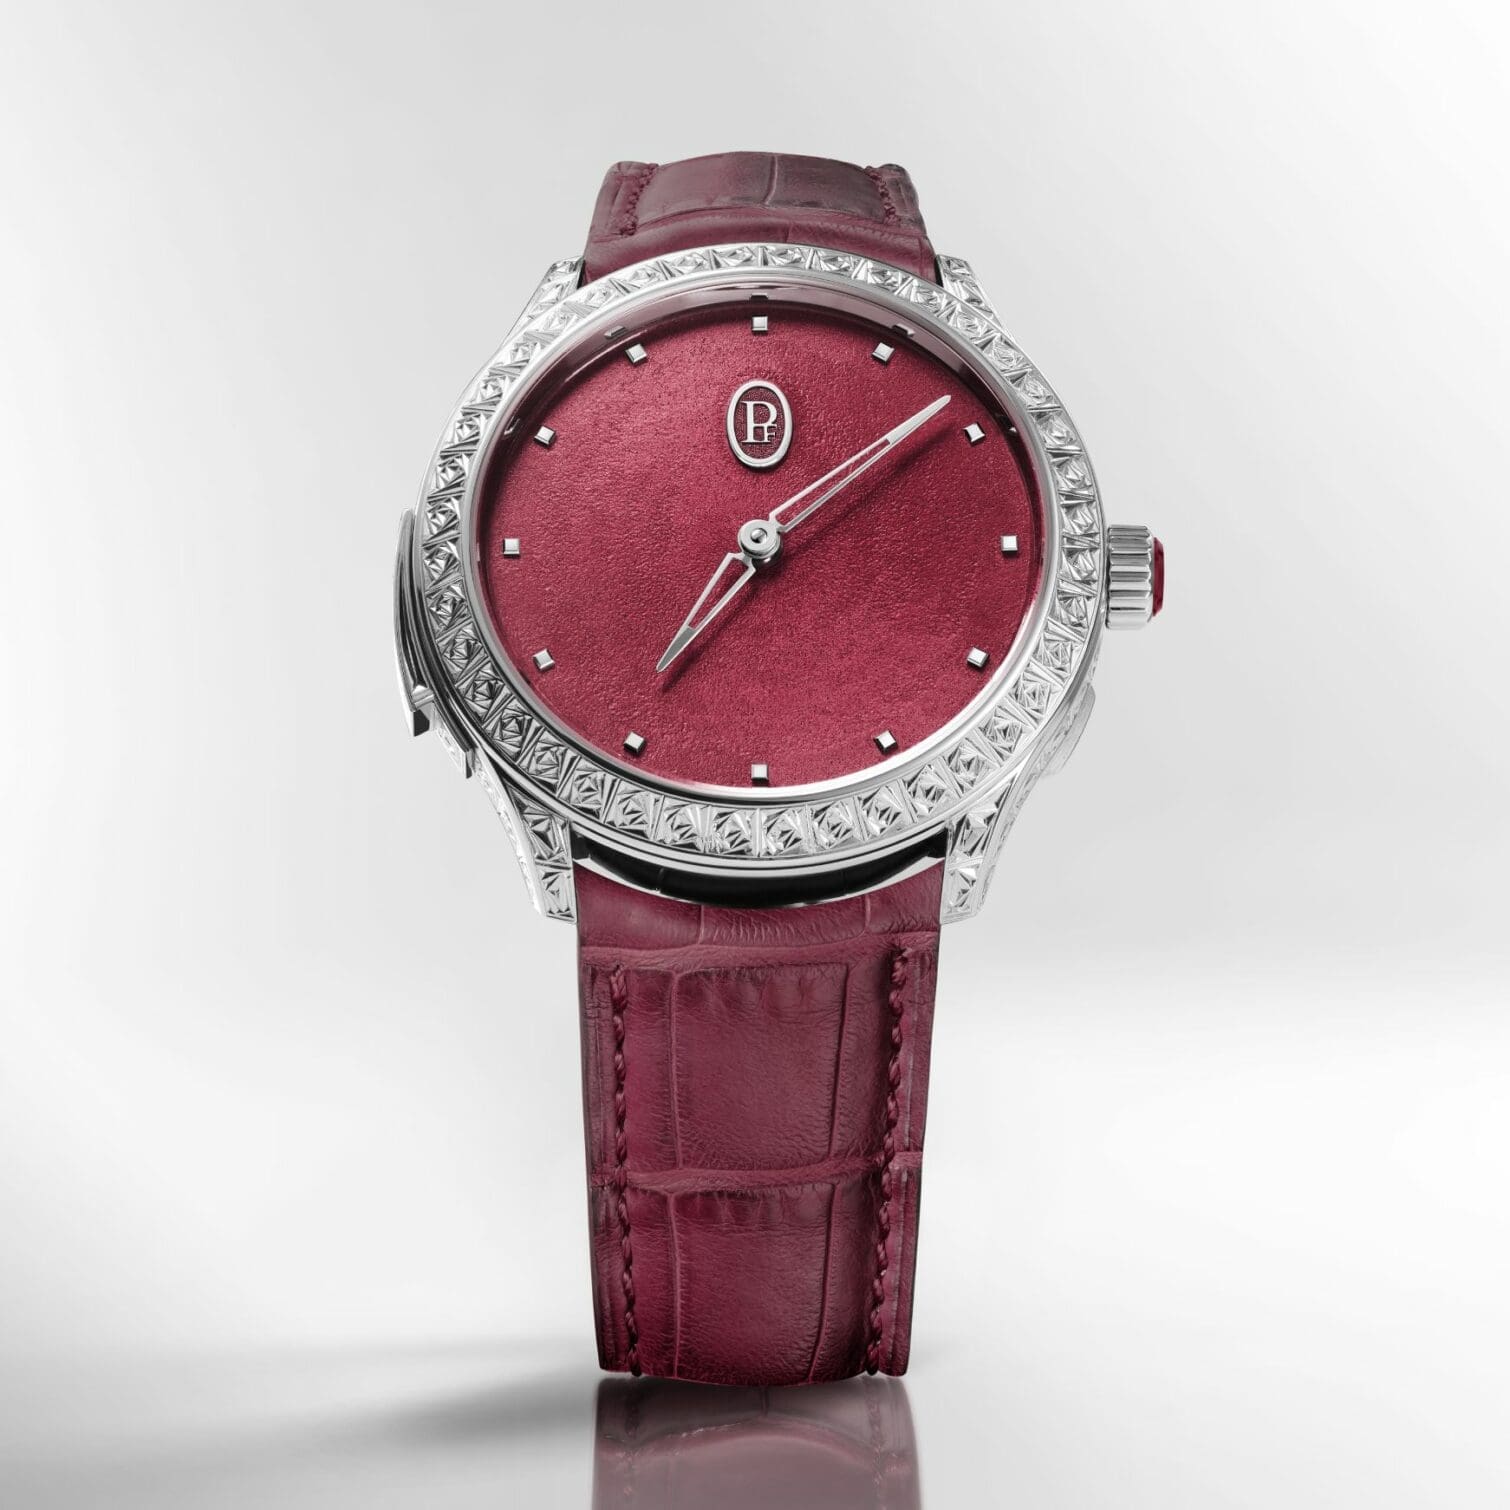 The Parmigiani Fleurier Rosa Mystica is the ultimate late Valentine’s Day gift